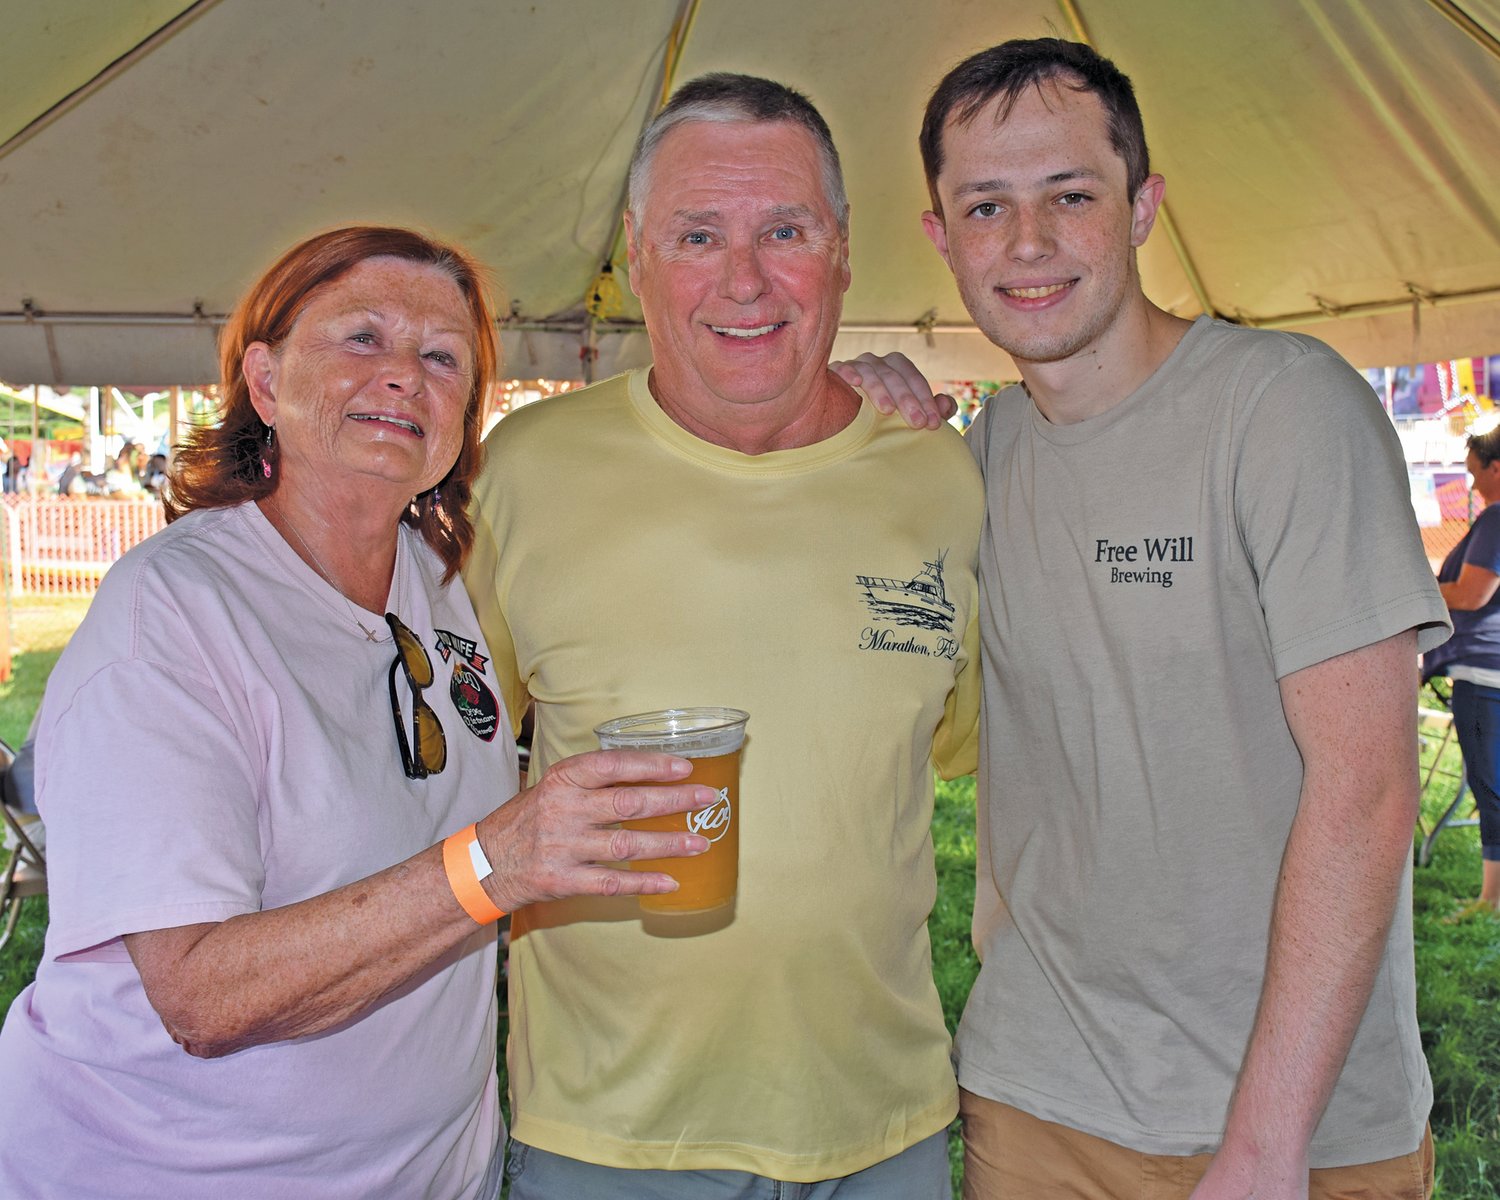 John and Sharon Corbett of Perkasie in the beer garden with Trevor Fling of Free Will Brewing Co.